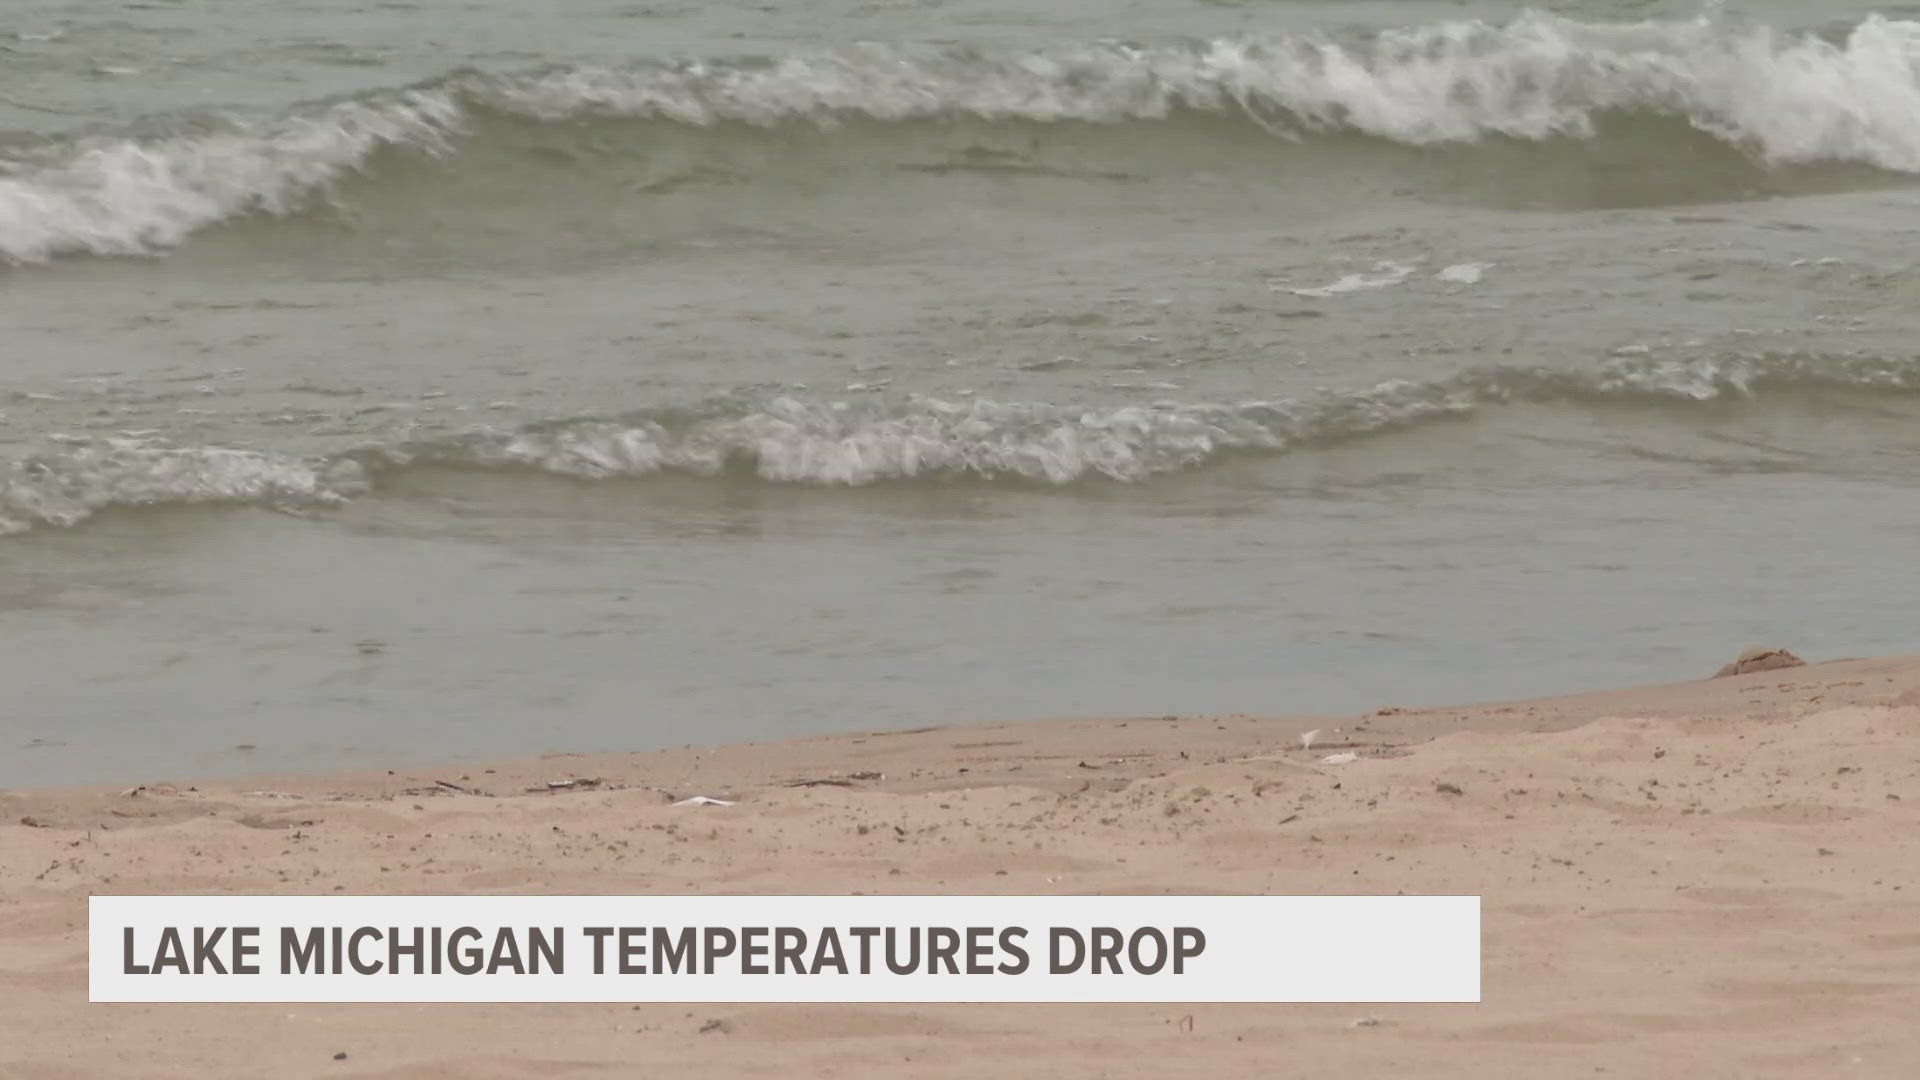 The U.S. National Weather Service saw nearly 20-degree water temperature drops offshore from Port Sheldon and South Haven earlier this week.